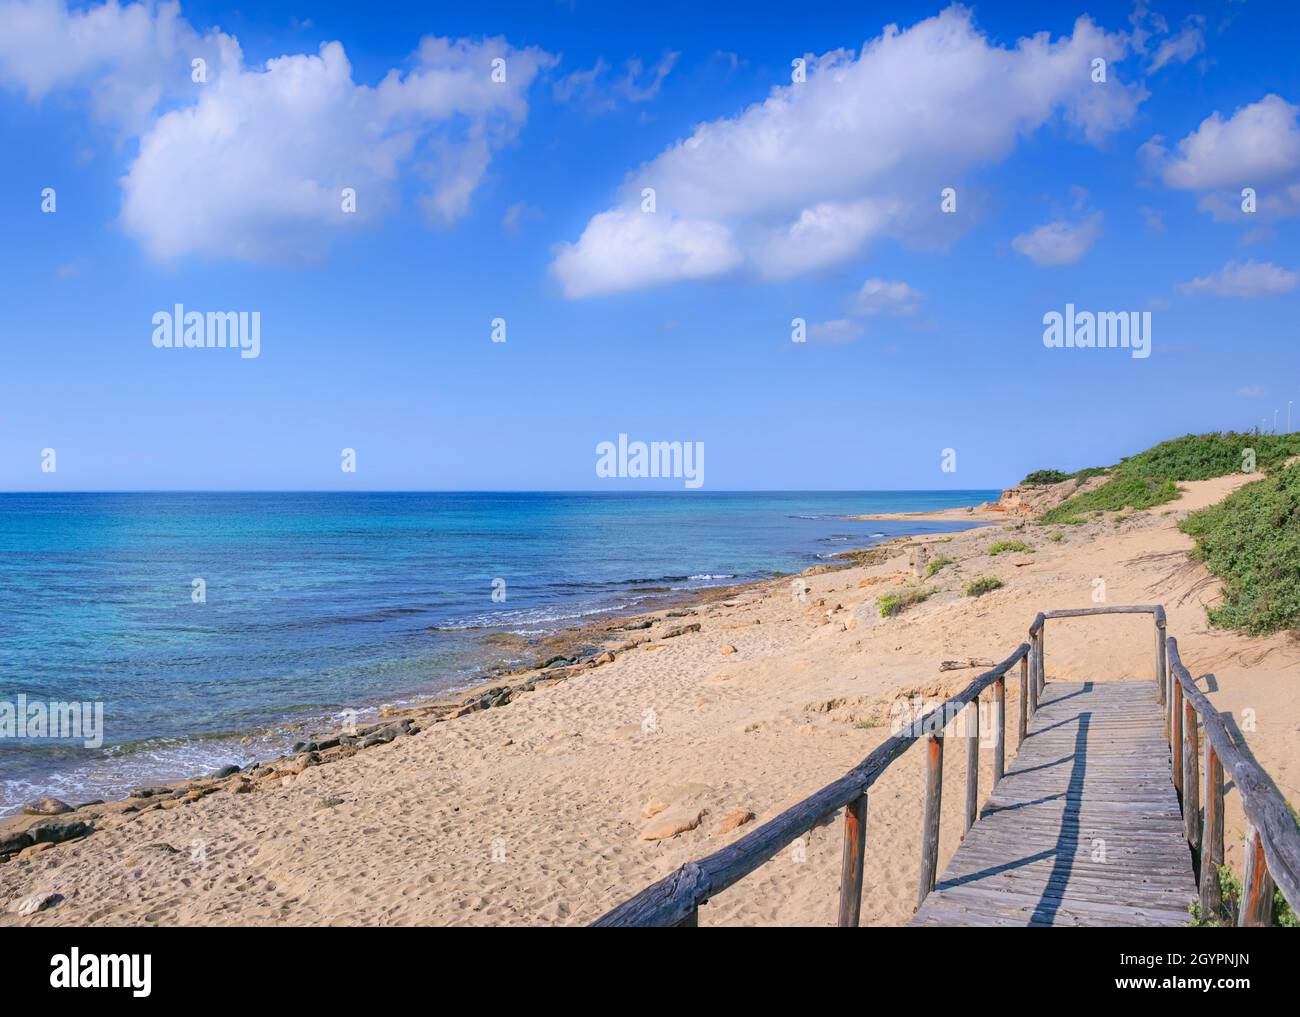 The most beautiful beaches of Italy: Campomarino dune park in Apulia, Italy.The protected area extends along the entire coast of the town of Maruggio. Stock Photo